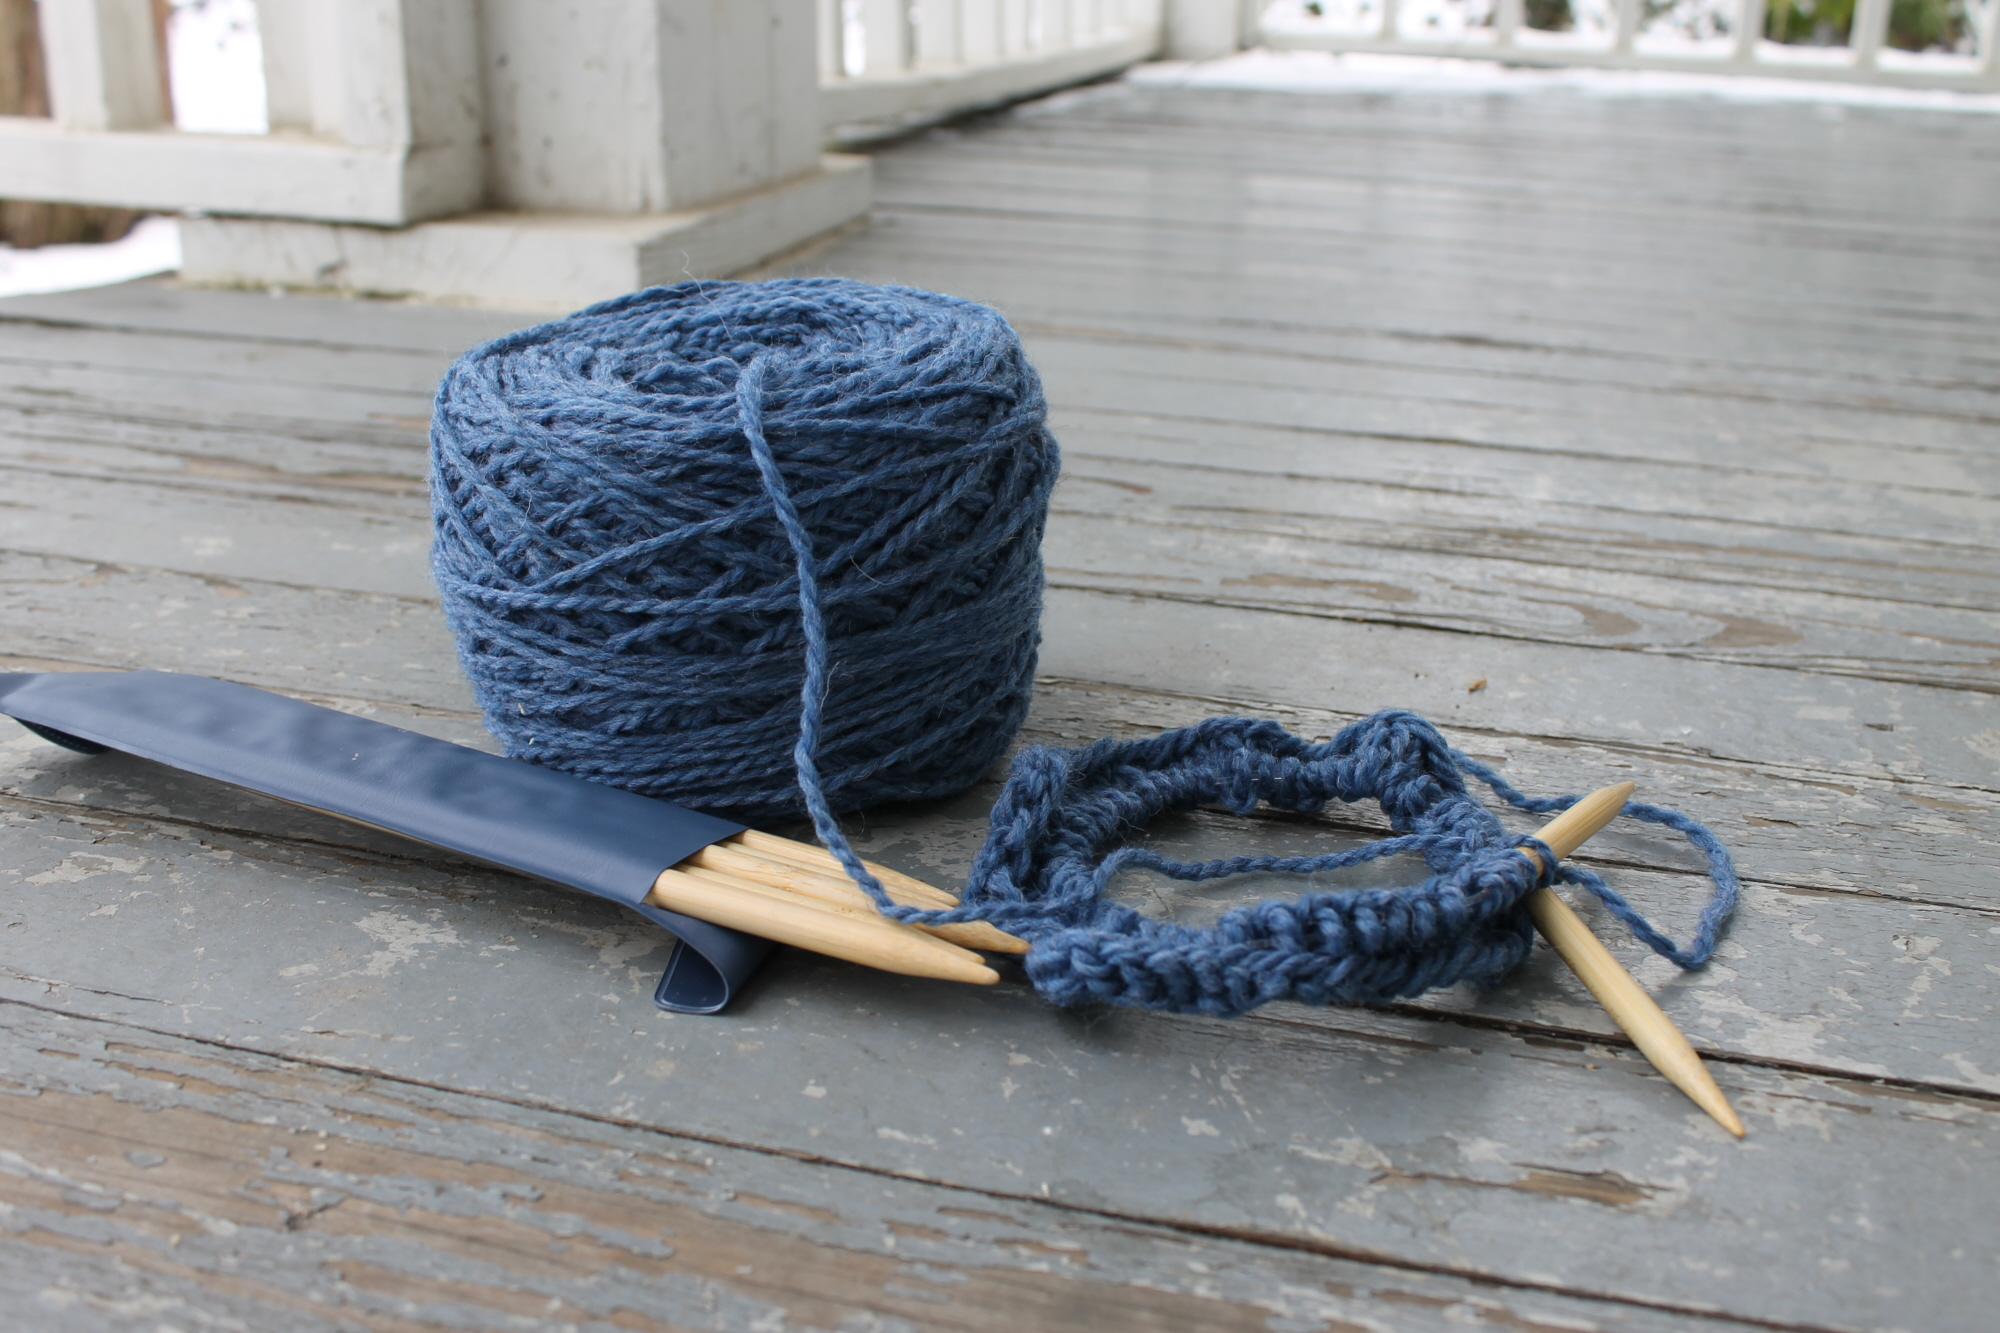 Switching from circular to double-pointed needles